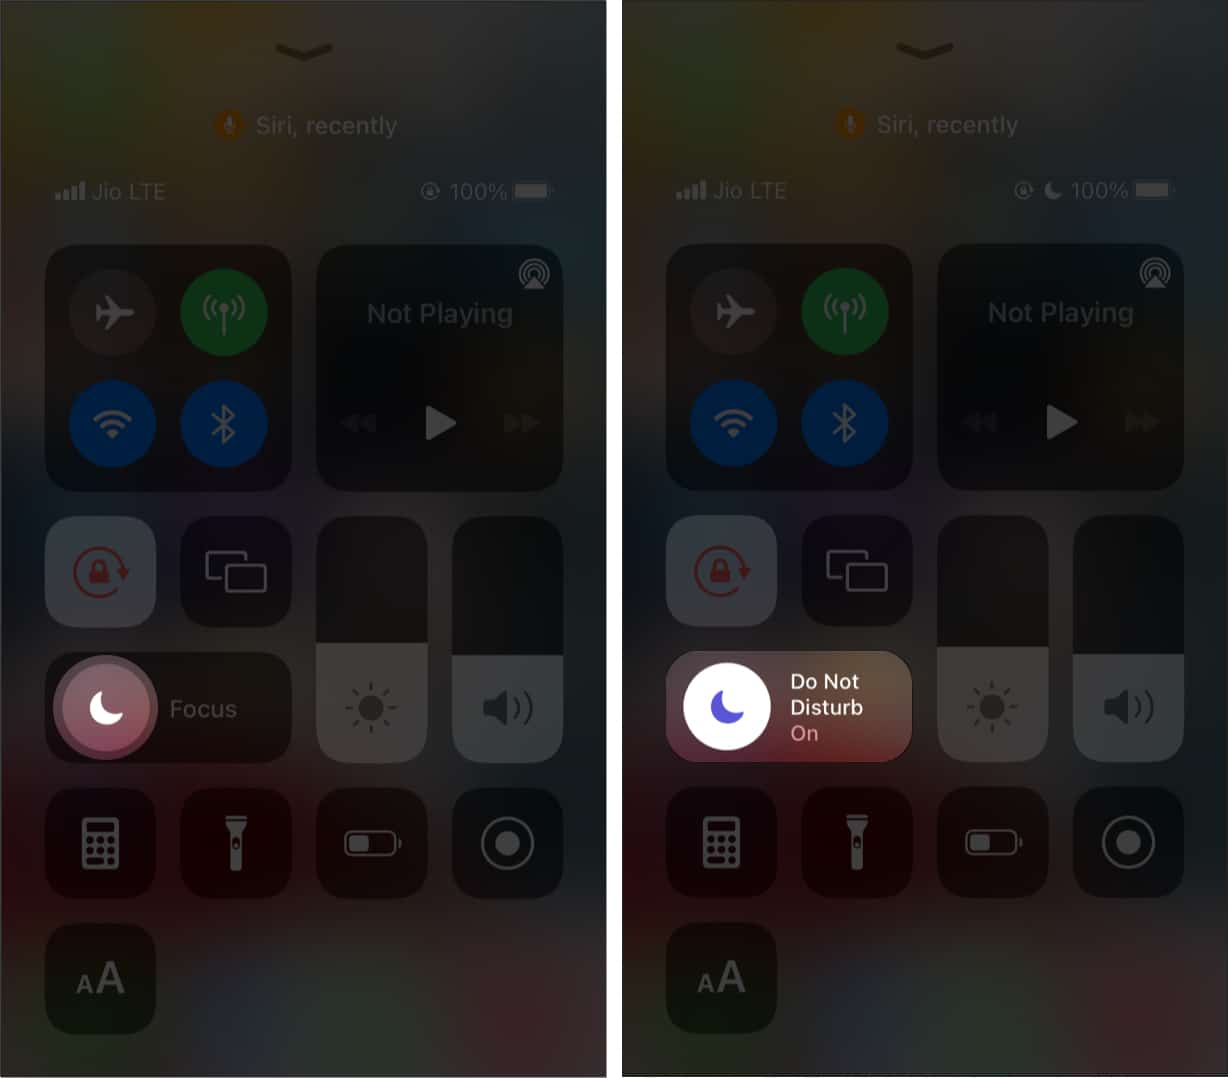 Tap white moon icon in iPhone Control Center to enable DND